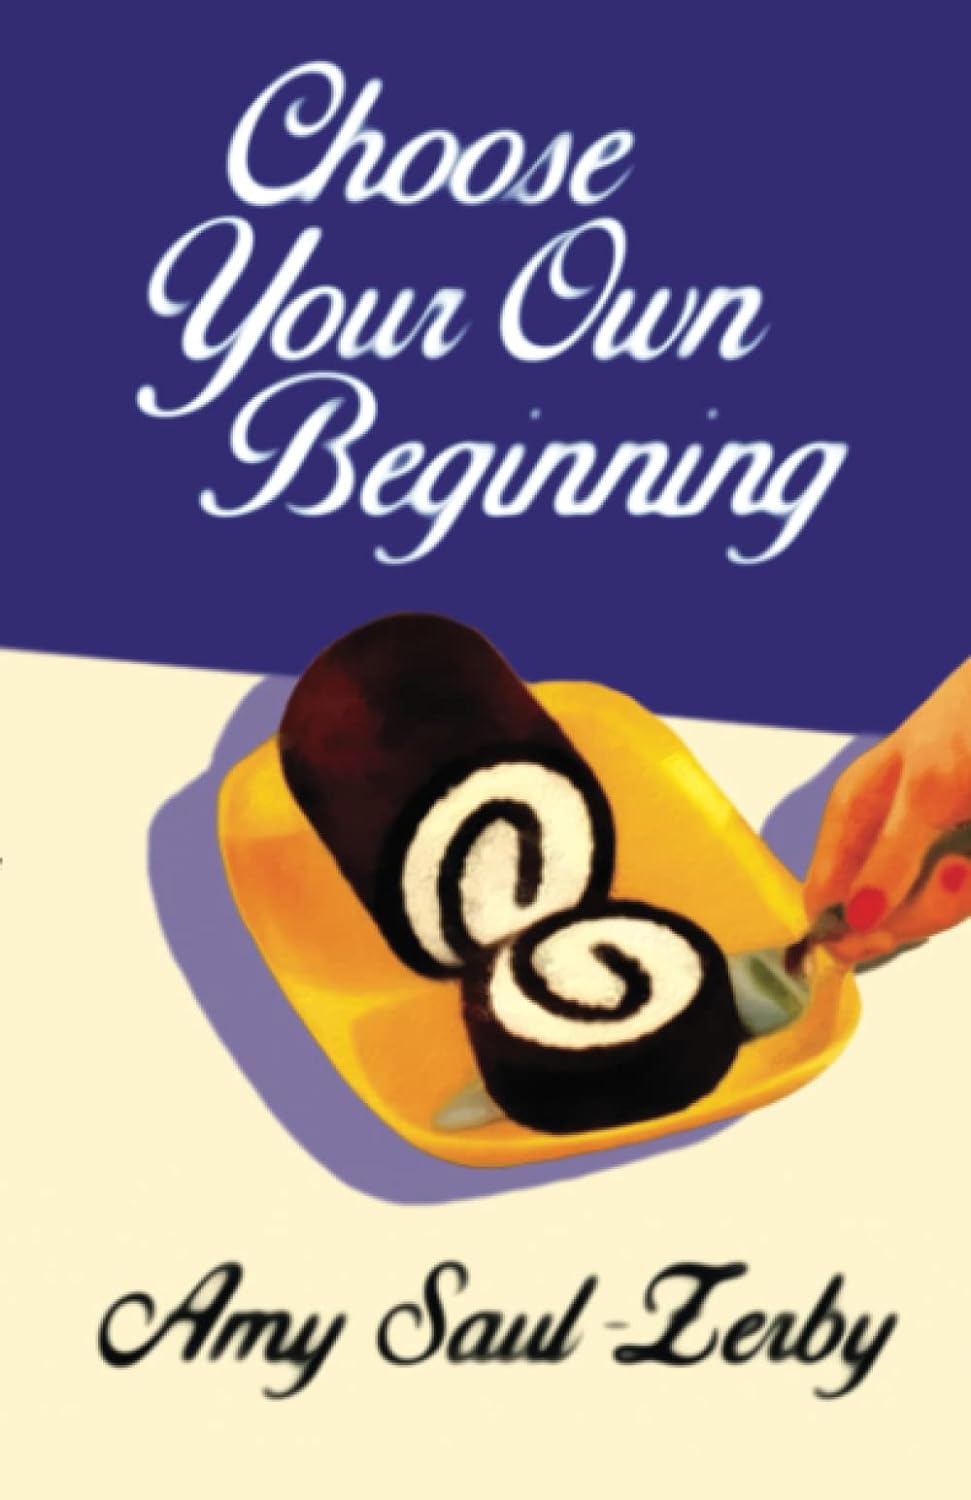 Choose Your Own Beginning, by Amy Saul-Zerby